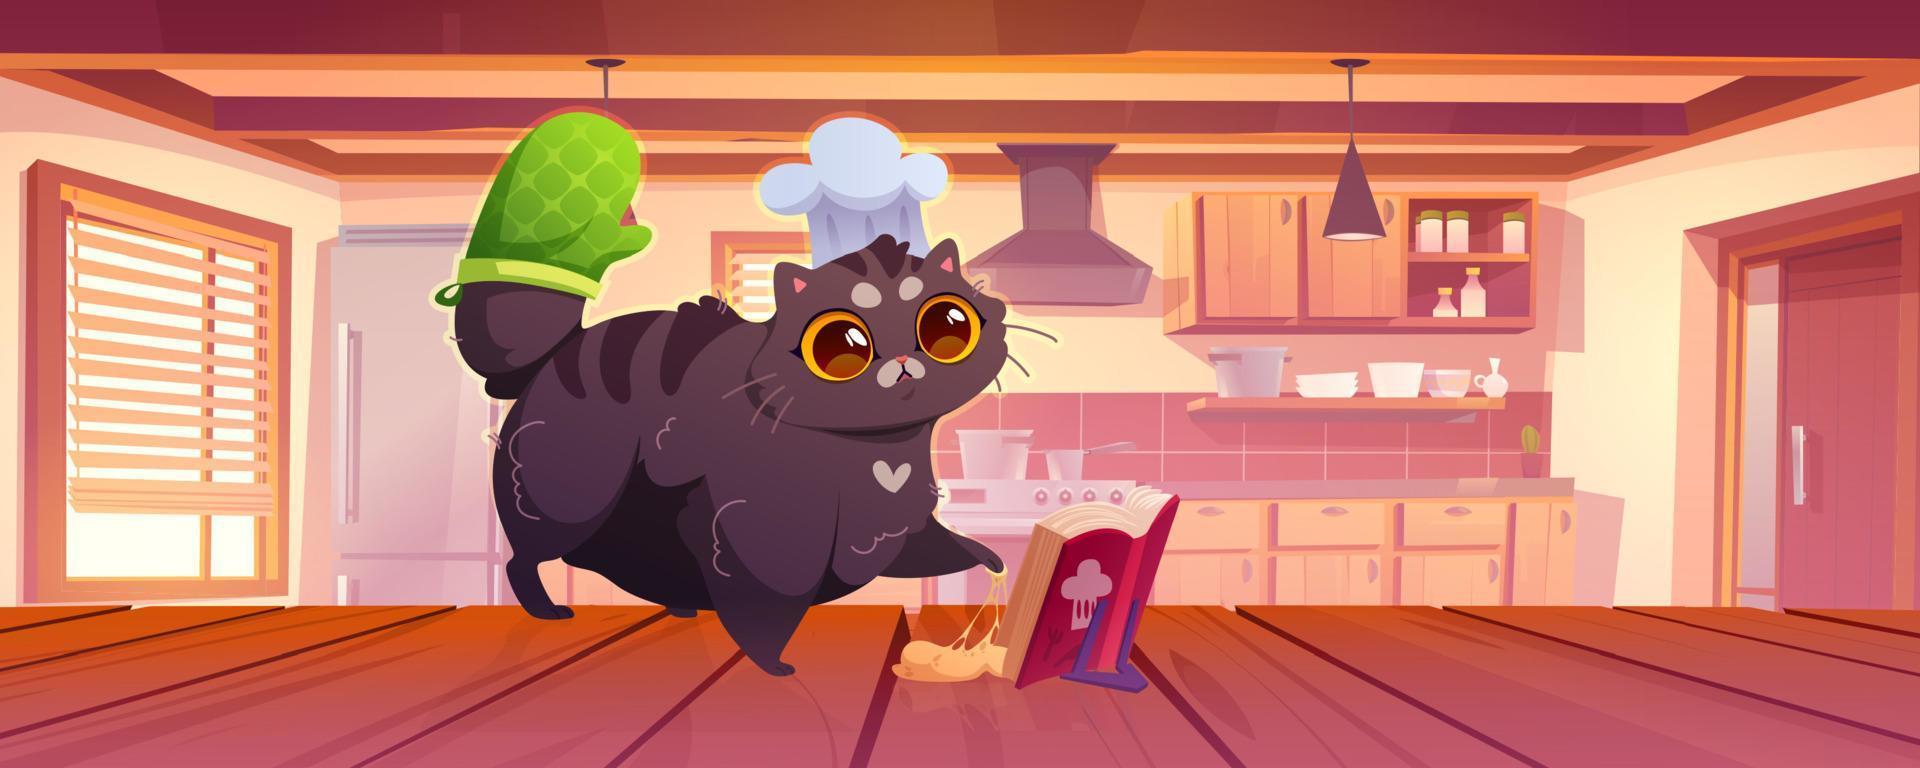 Funny cat cooking on kitchen interior, cute kitten vector